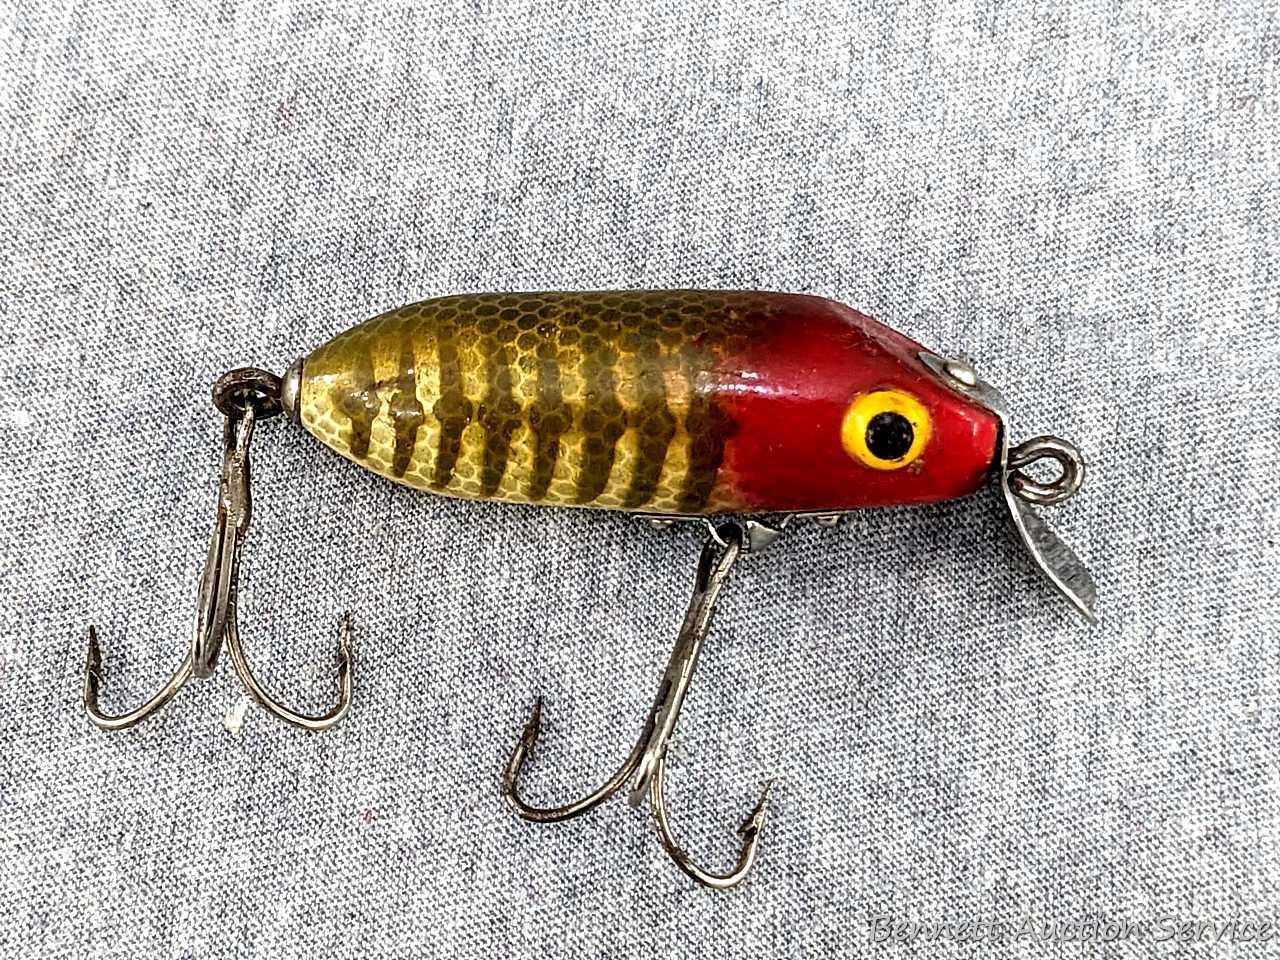 Is this vintage fishing lure by the Fred Rinehart